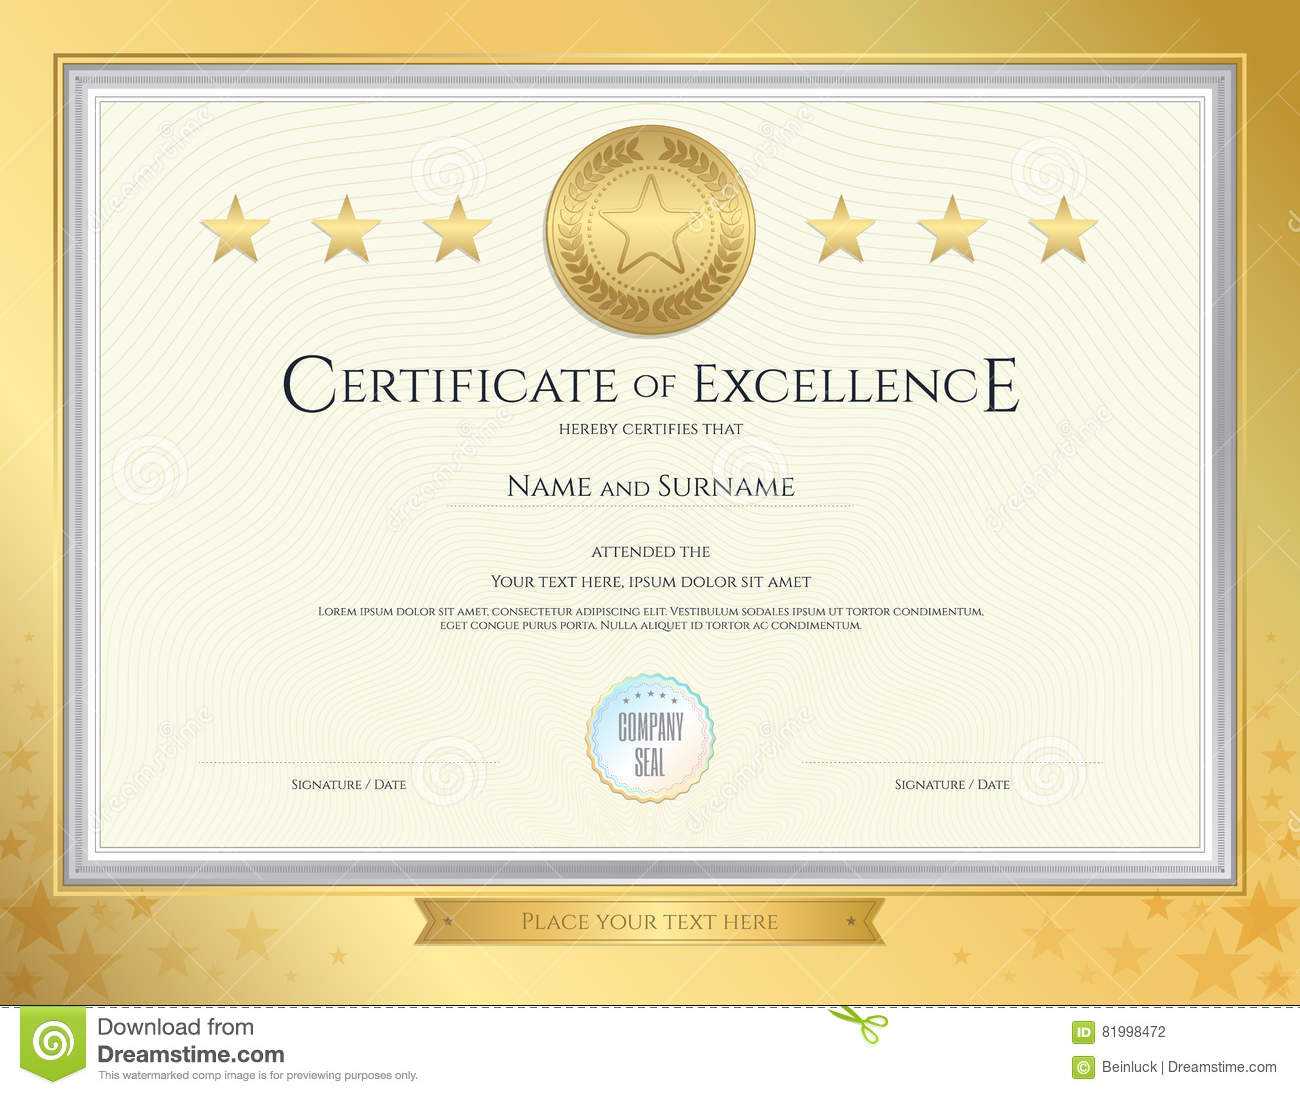 Elegant Certificate Template For Excellence, Achievement Throughout Elegant Certificate Templates Free